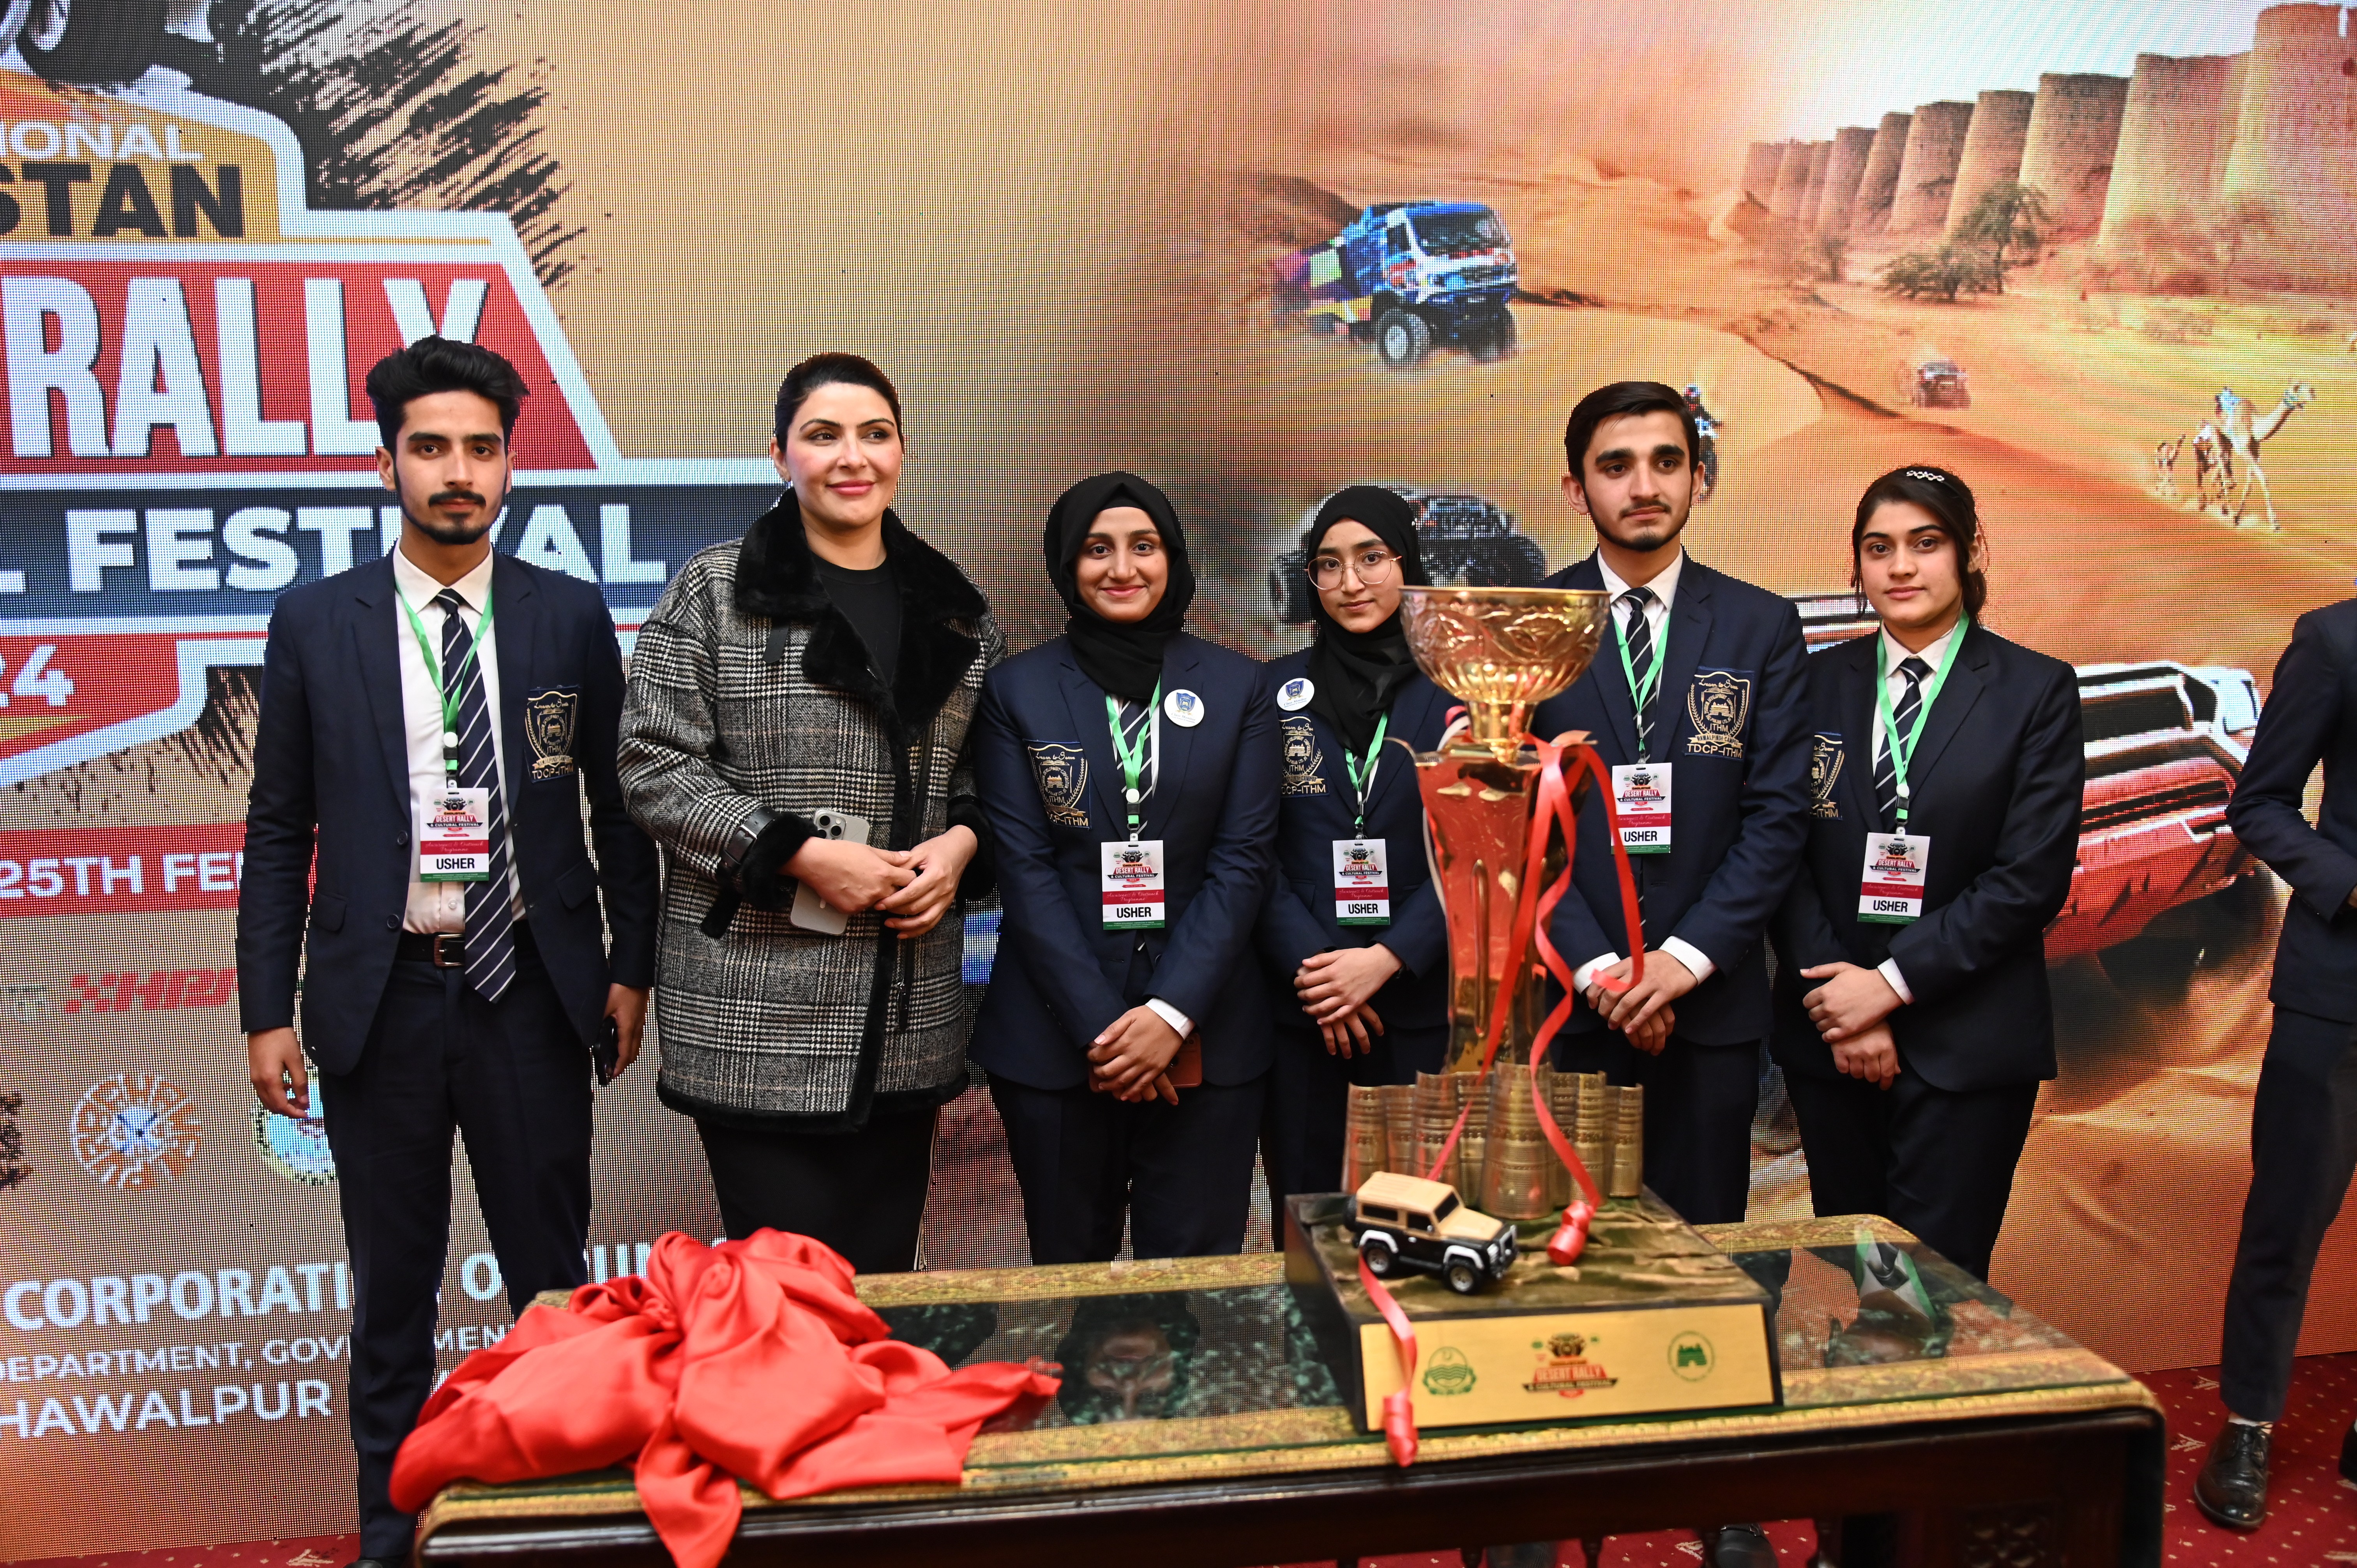 A group photo of chief guest and the participants with the trophy